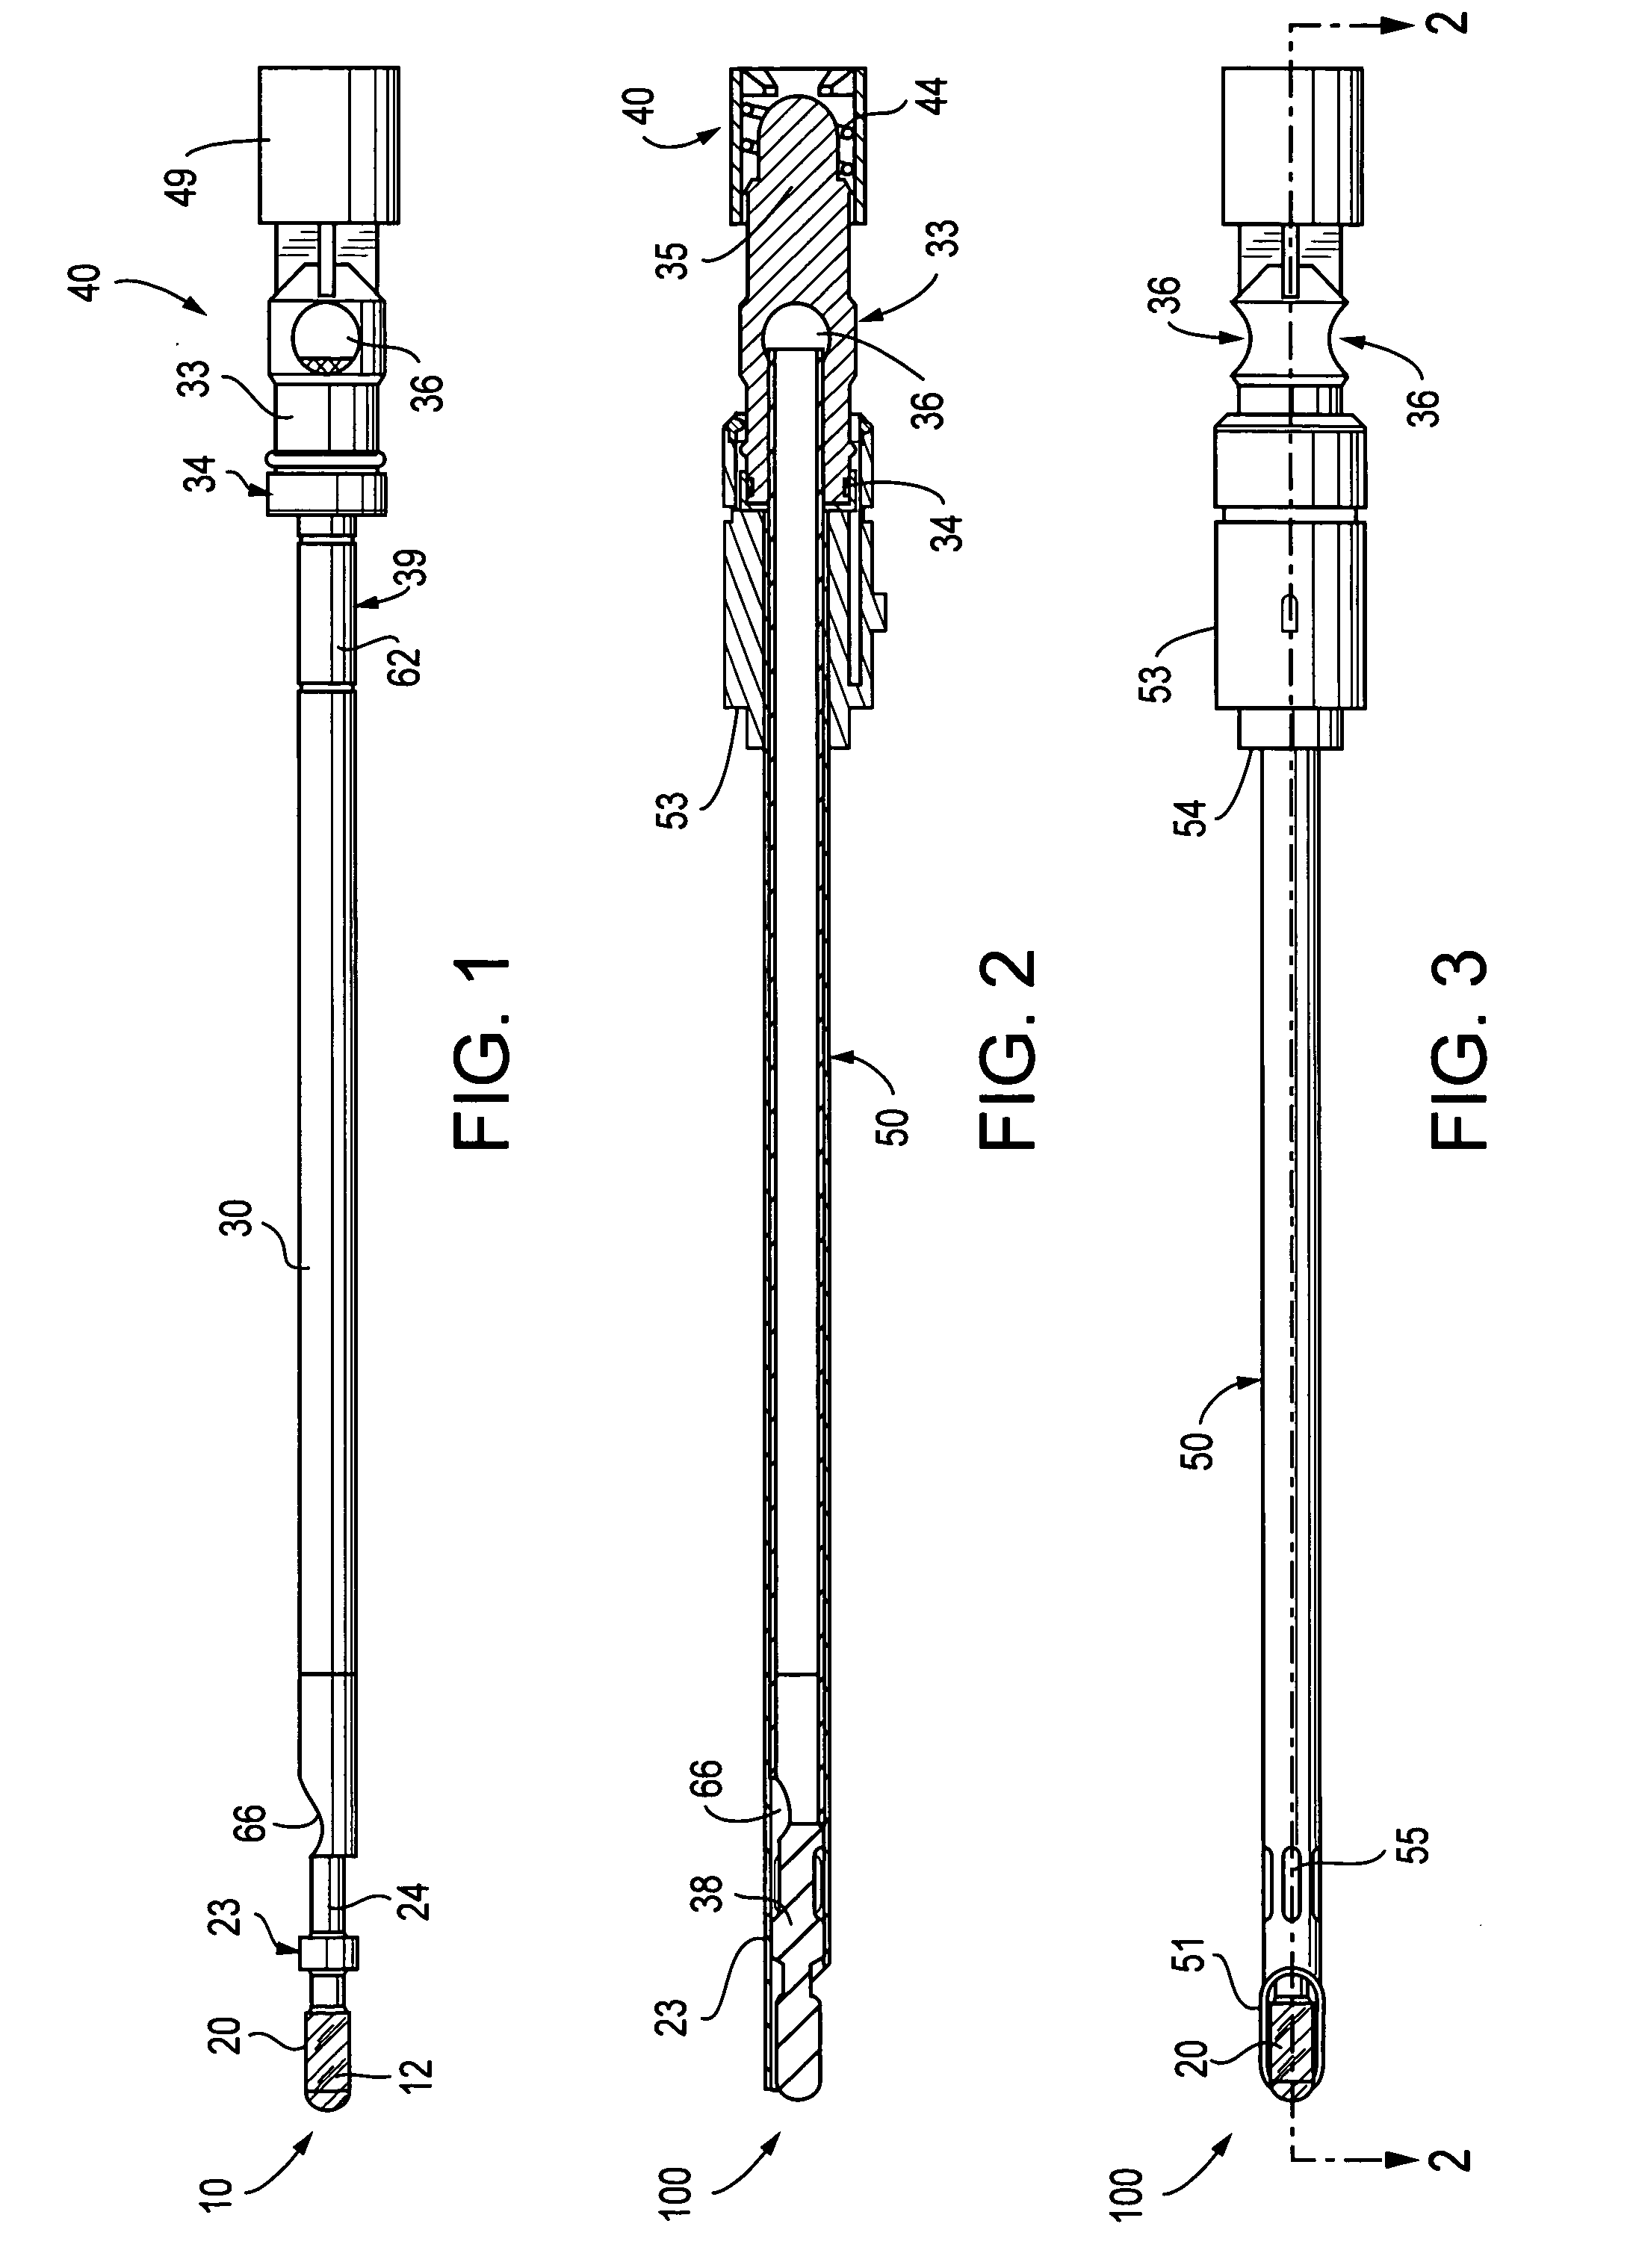 Surgical abrader with suction port proximal to bearing